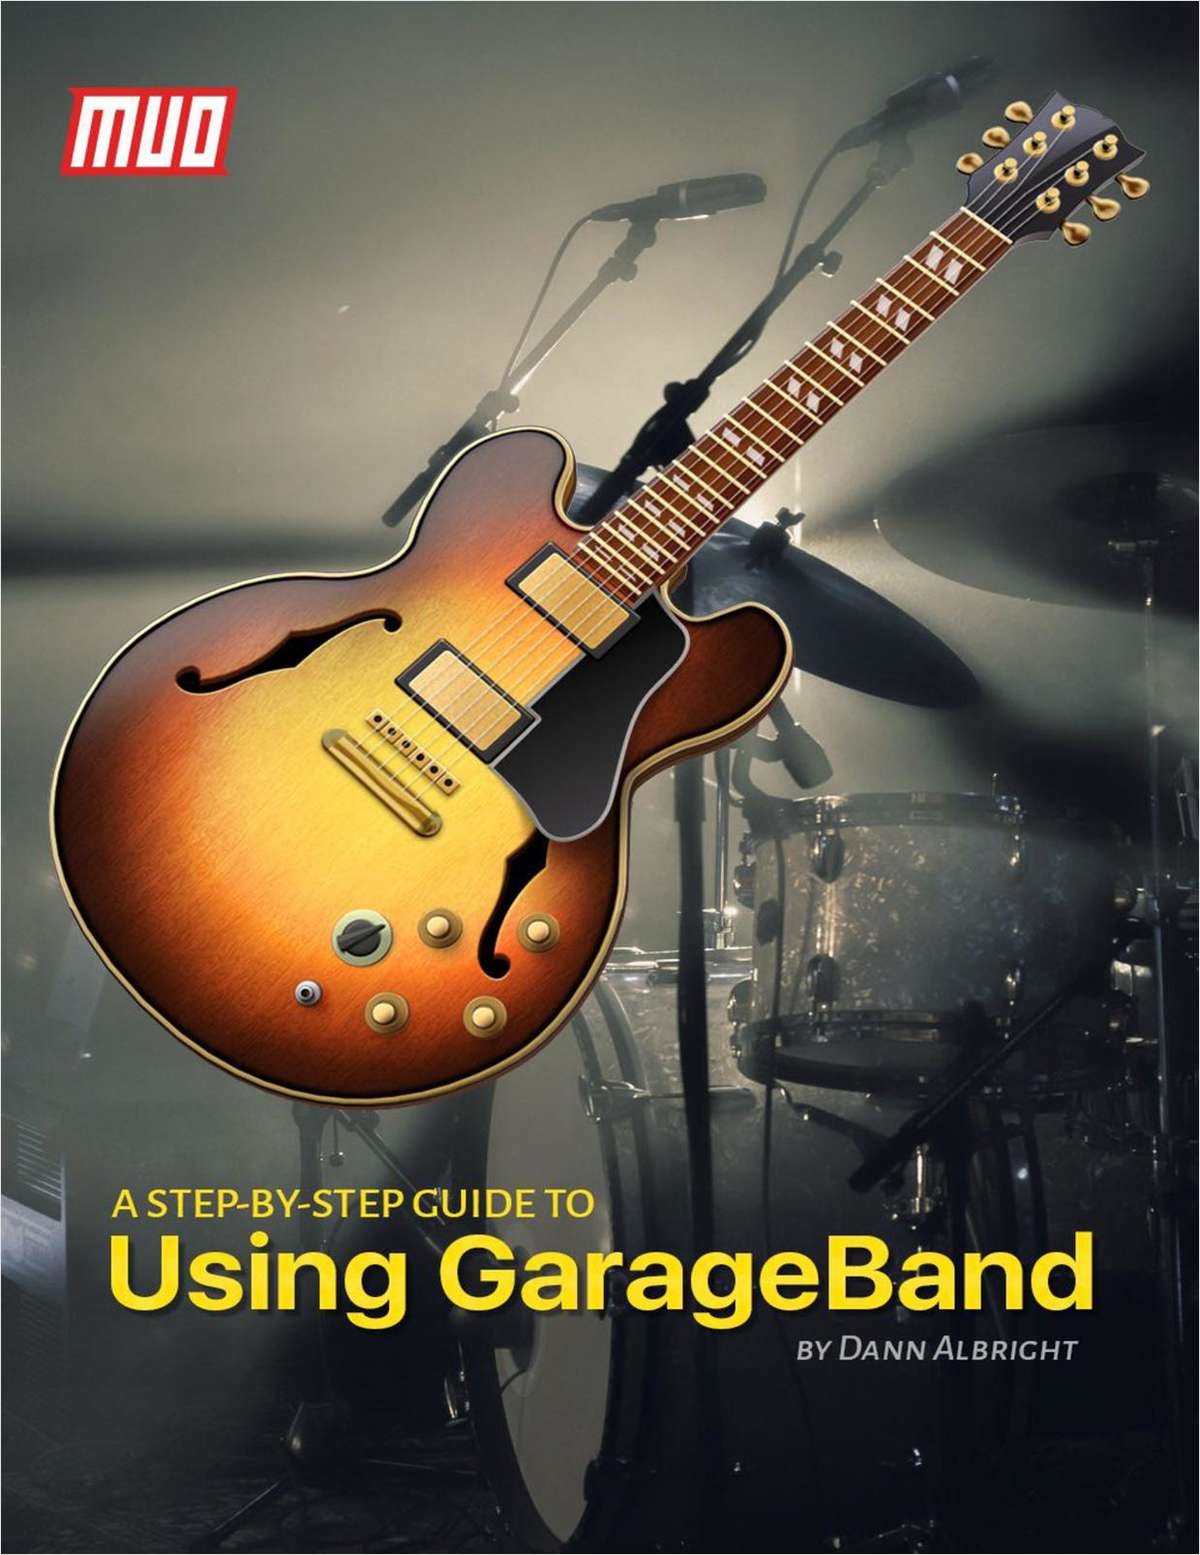 How to Use GarageBand: A Step-By-Step Guide